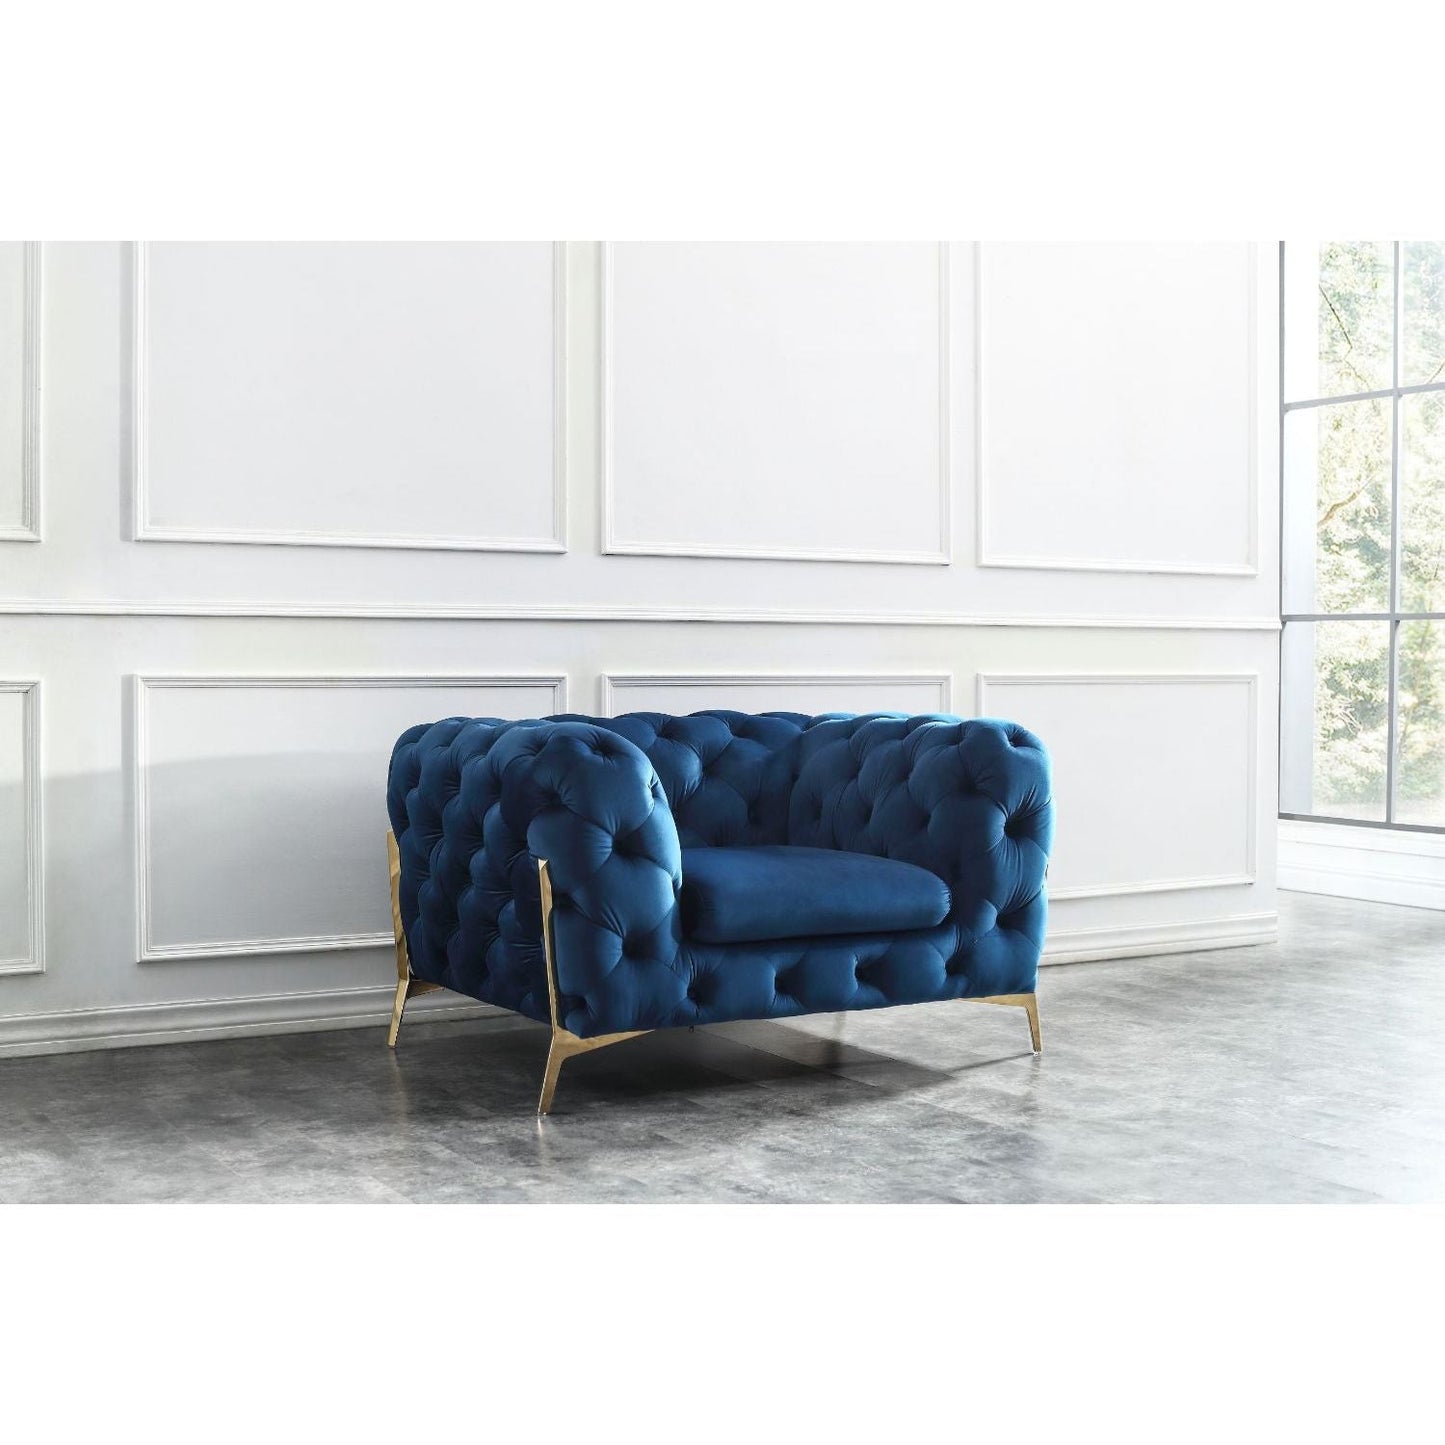 Glamour Chair in Blue jnmfurniture Chairs & Seating 17182-C